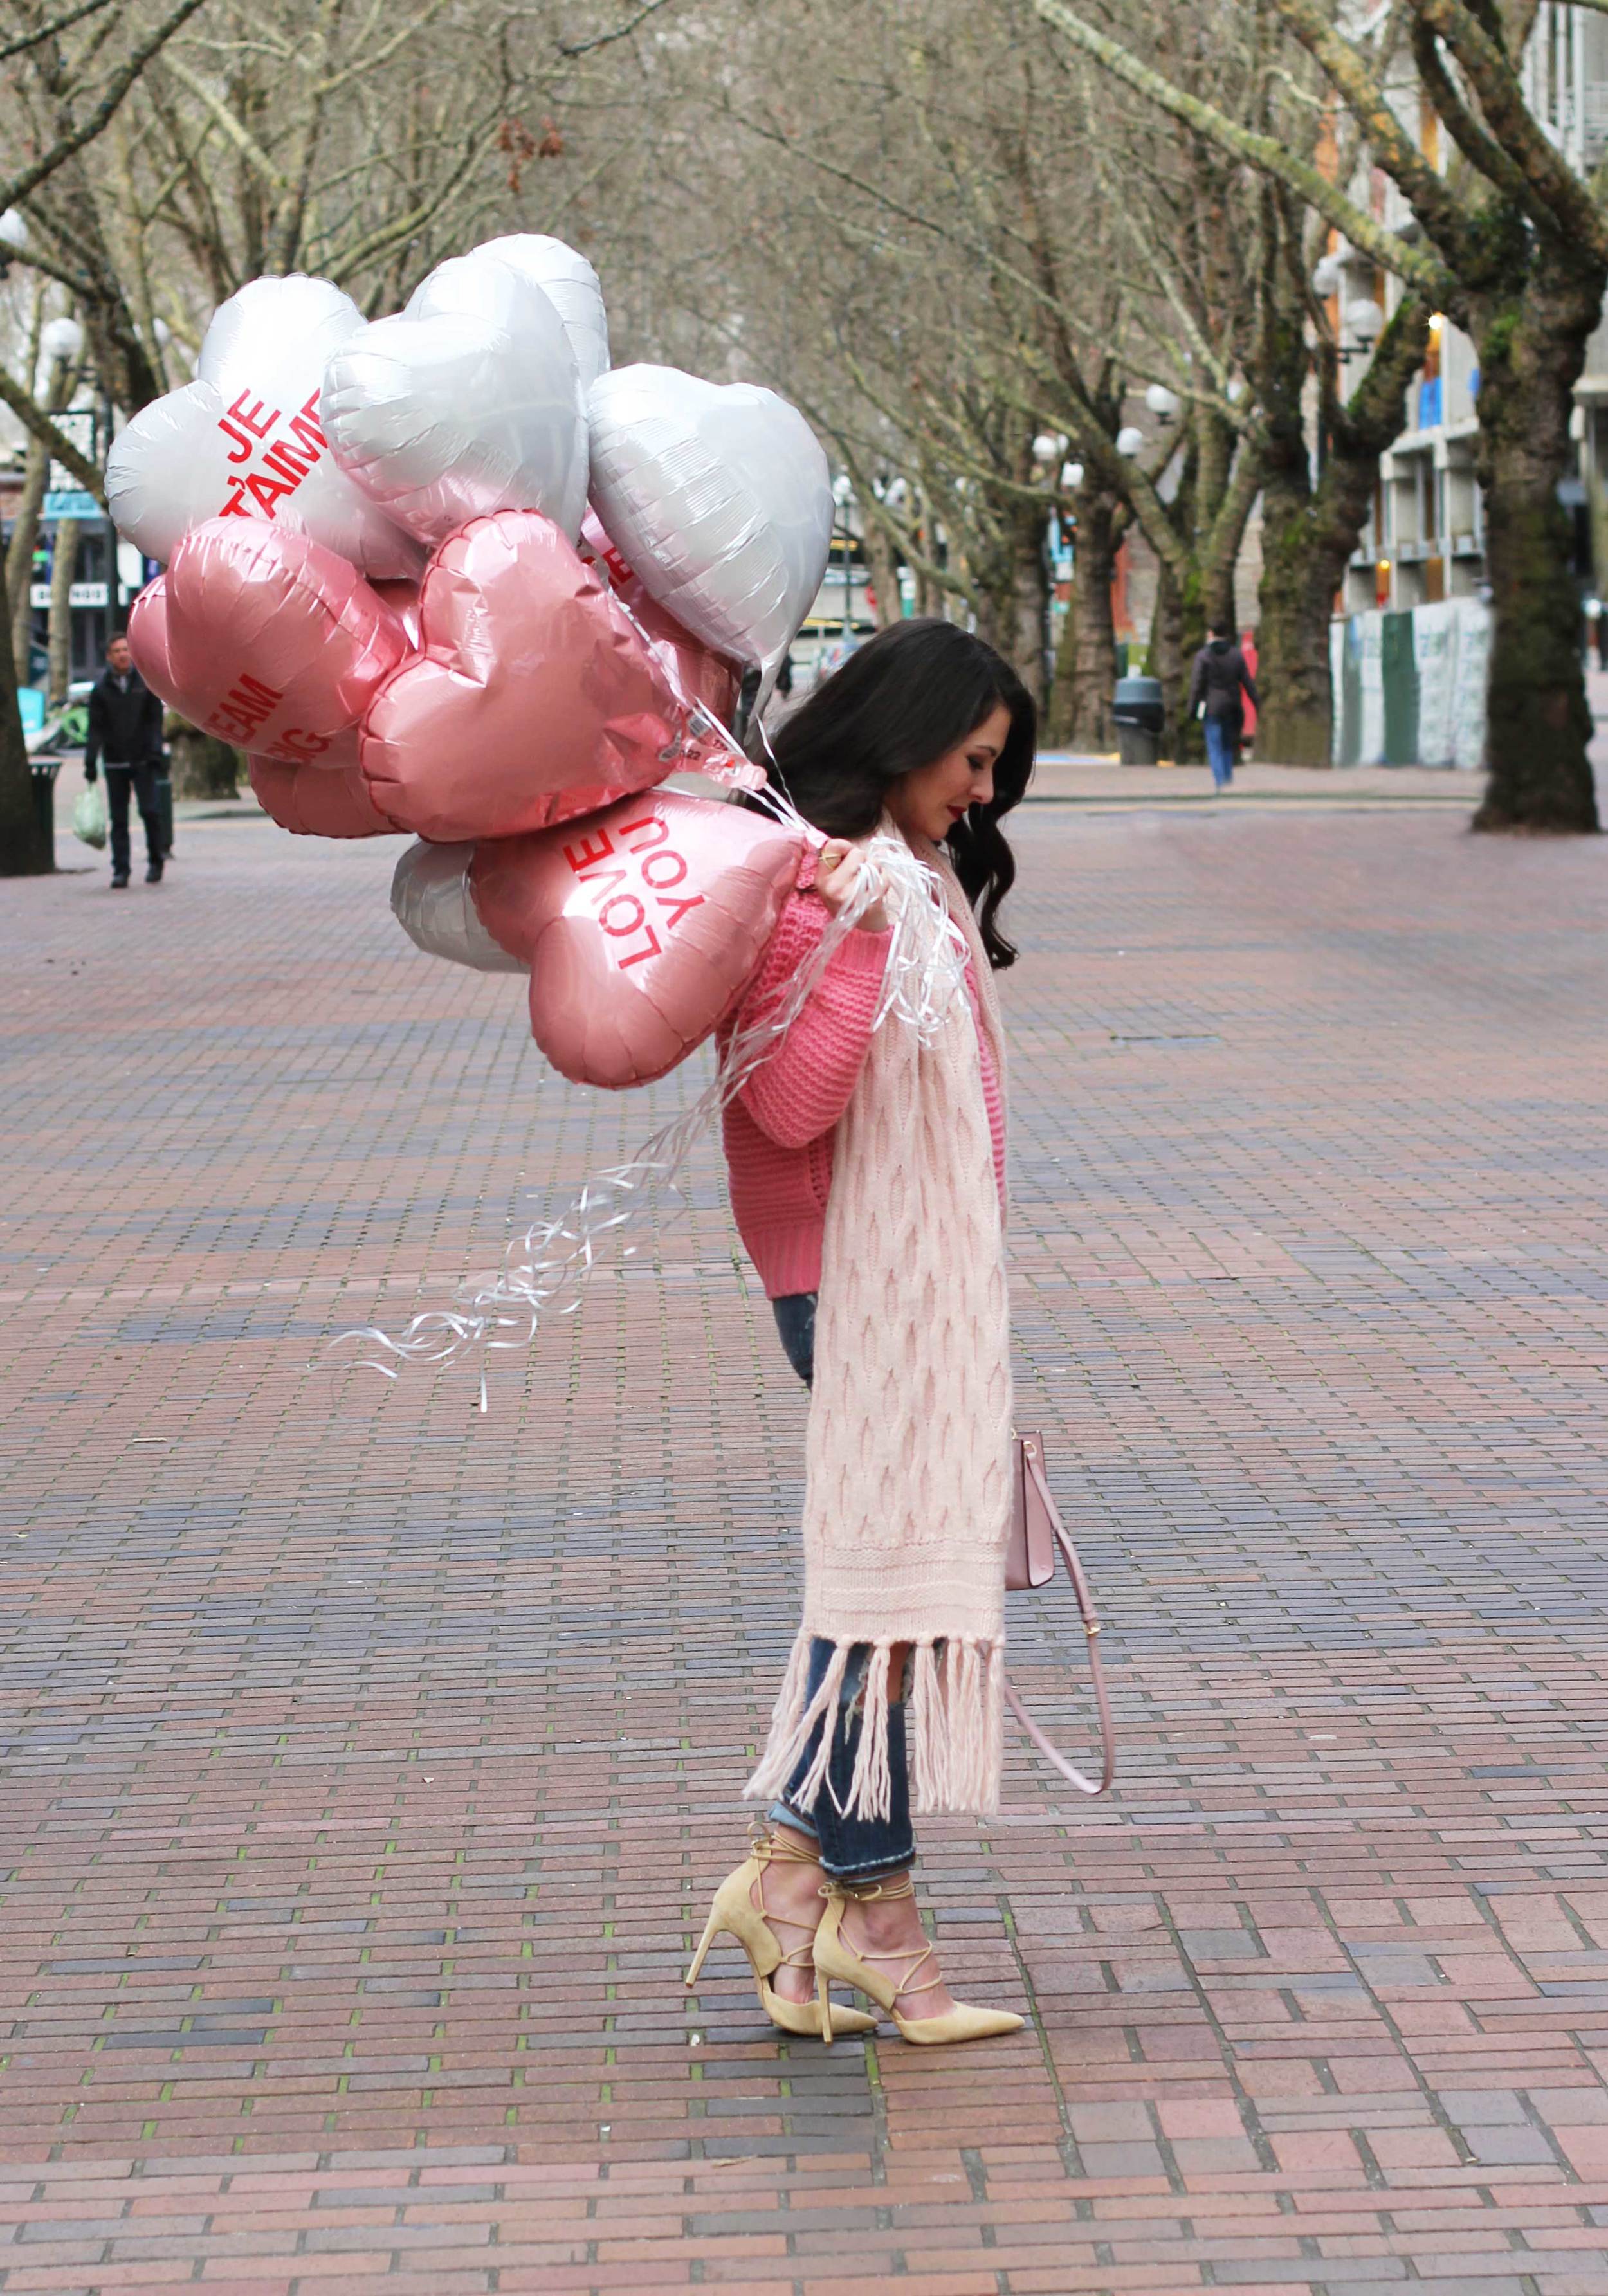 Casual Valentine's Day Outfit, Banana Republic Cable-Knit Sweater & Scarf, Destroyed Girlfriend Jeans, Sam Edelman "Dayna" Lace-Up Pumps, Rebecca Minkoff 'Mab Mini' Bag, Conversation Heart Balloons 